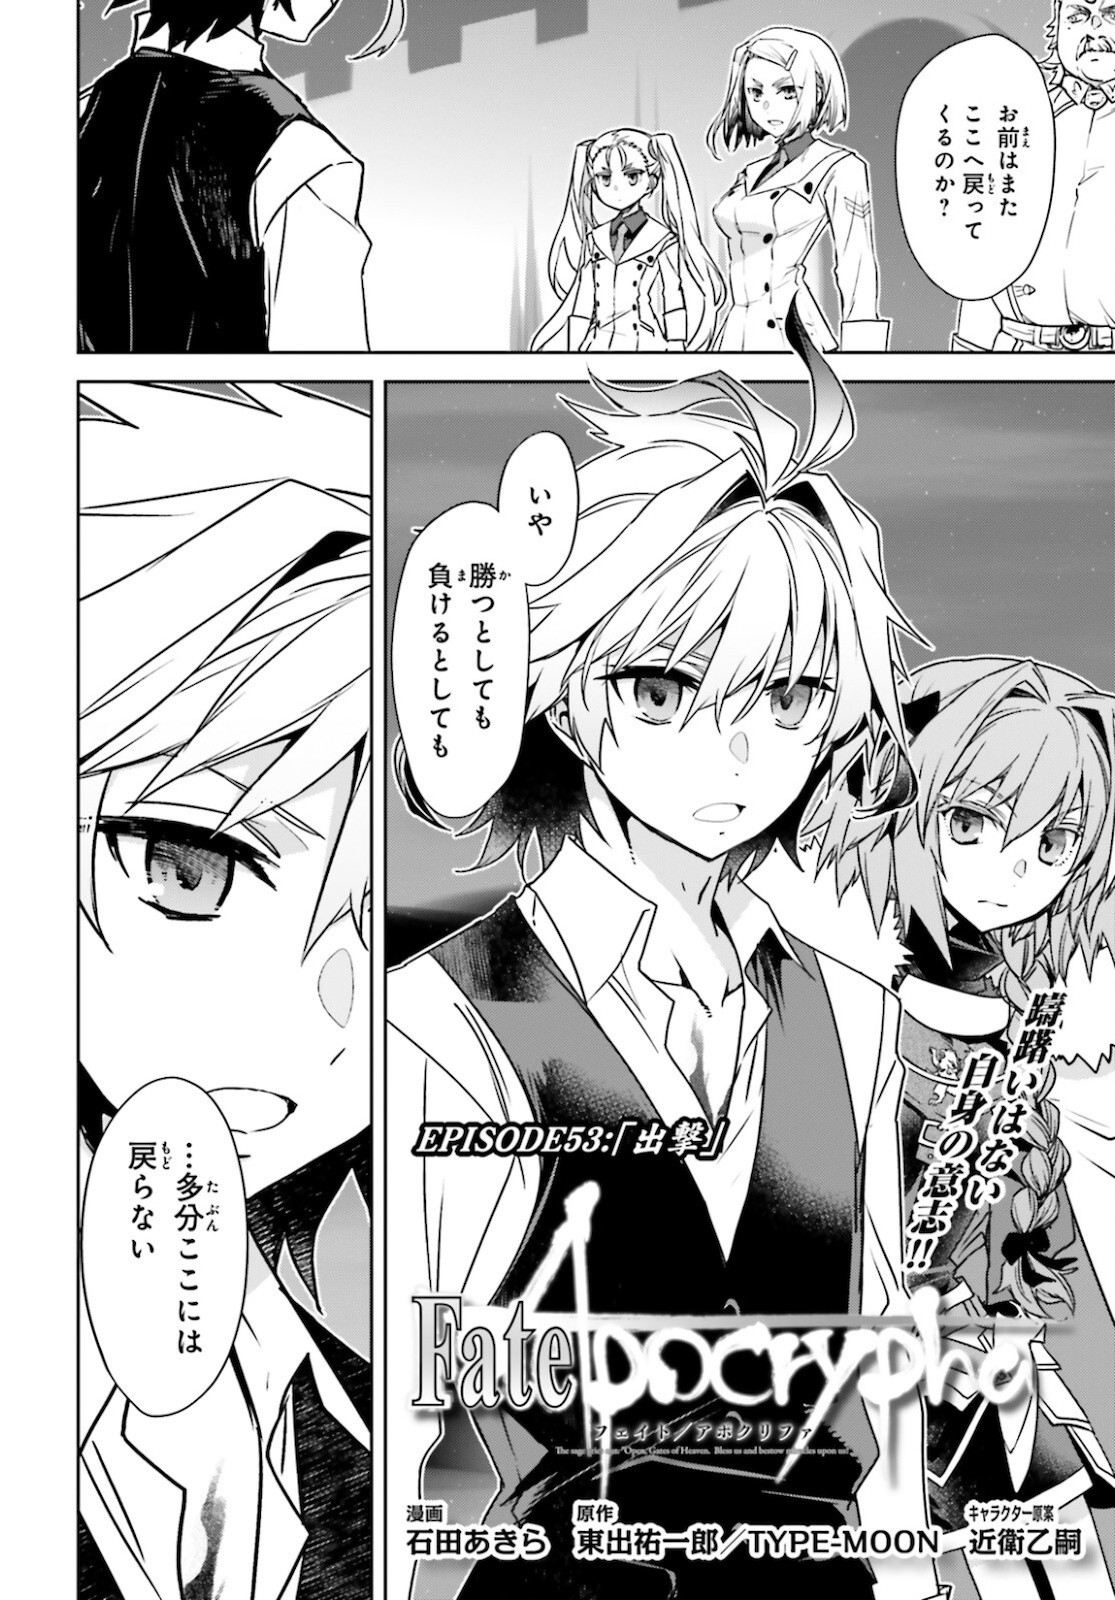 Fate-Apocrypha - Chapter 53 - Page 2